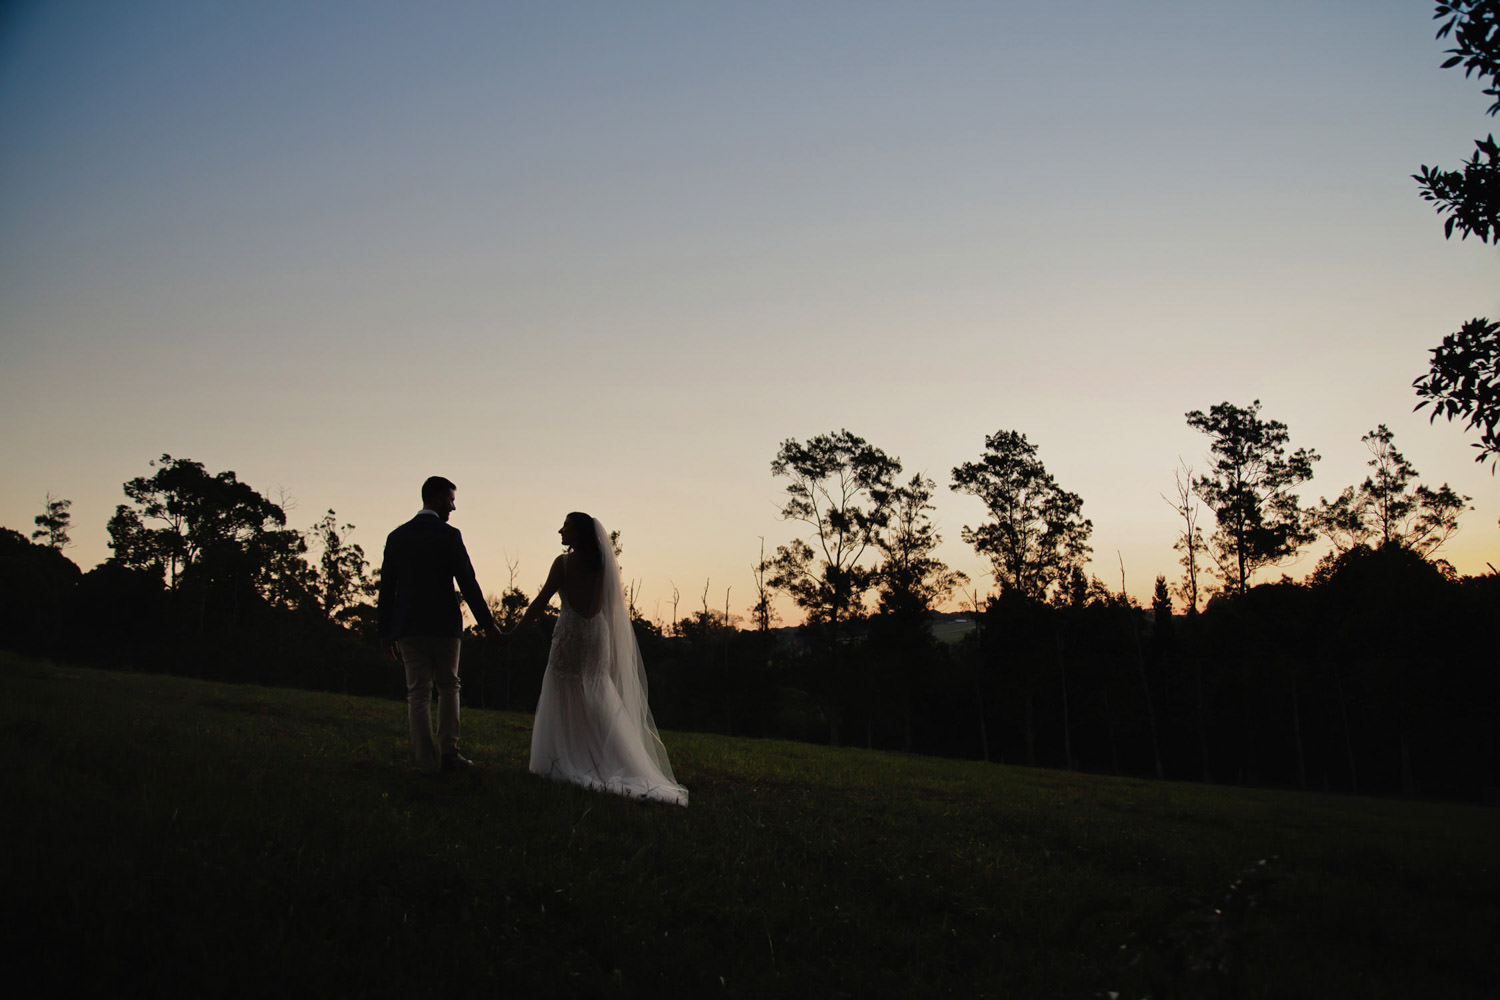 sunset-Ewingsdale-hall-DIY-Wedding-ideas-natural, fun, romantic-wedding-photography-QuinceandMulberry